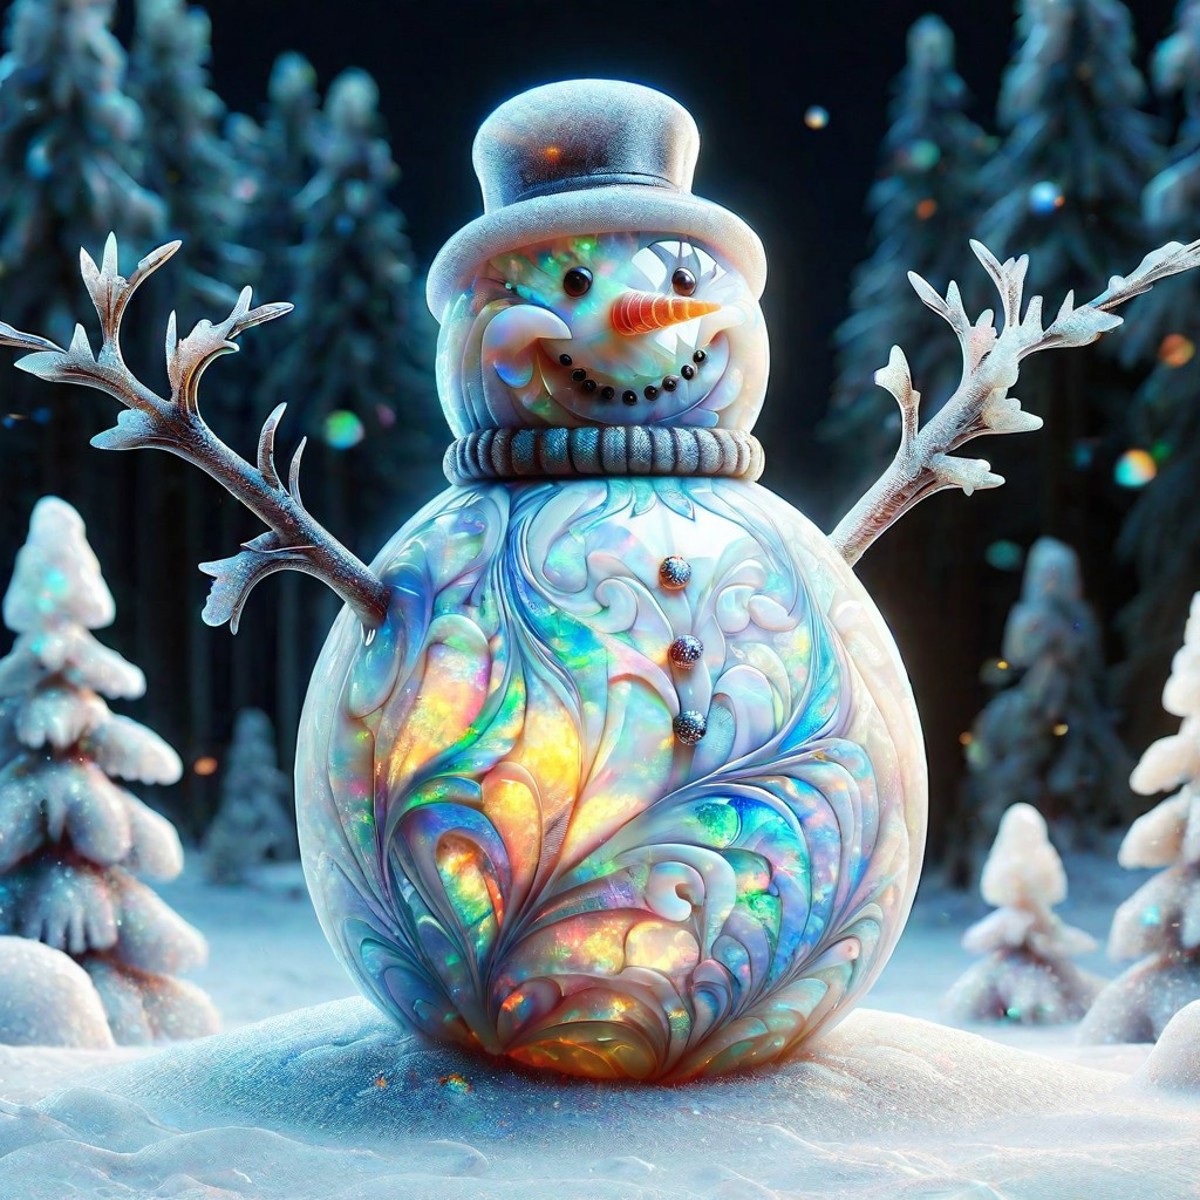 A 3D Snowman with a top hat and scarf.